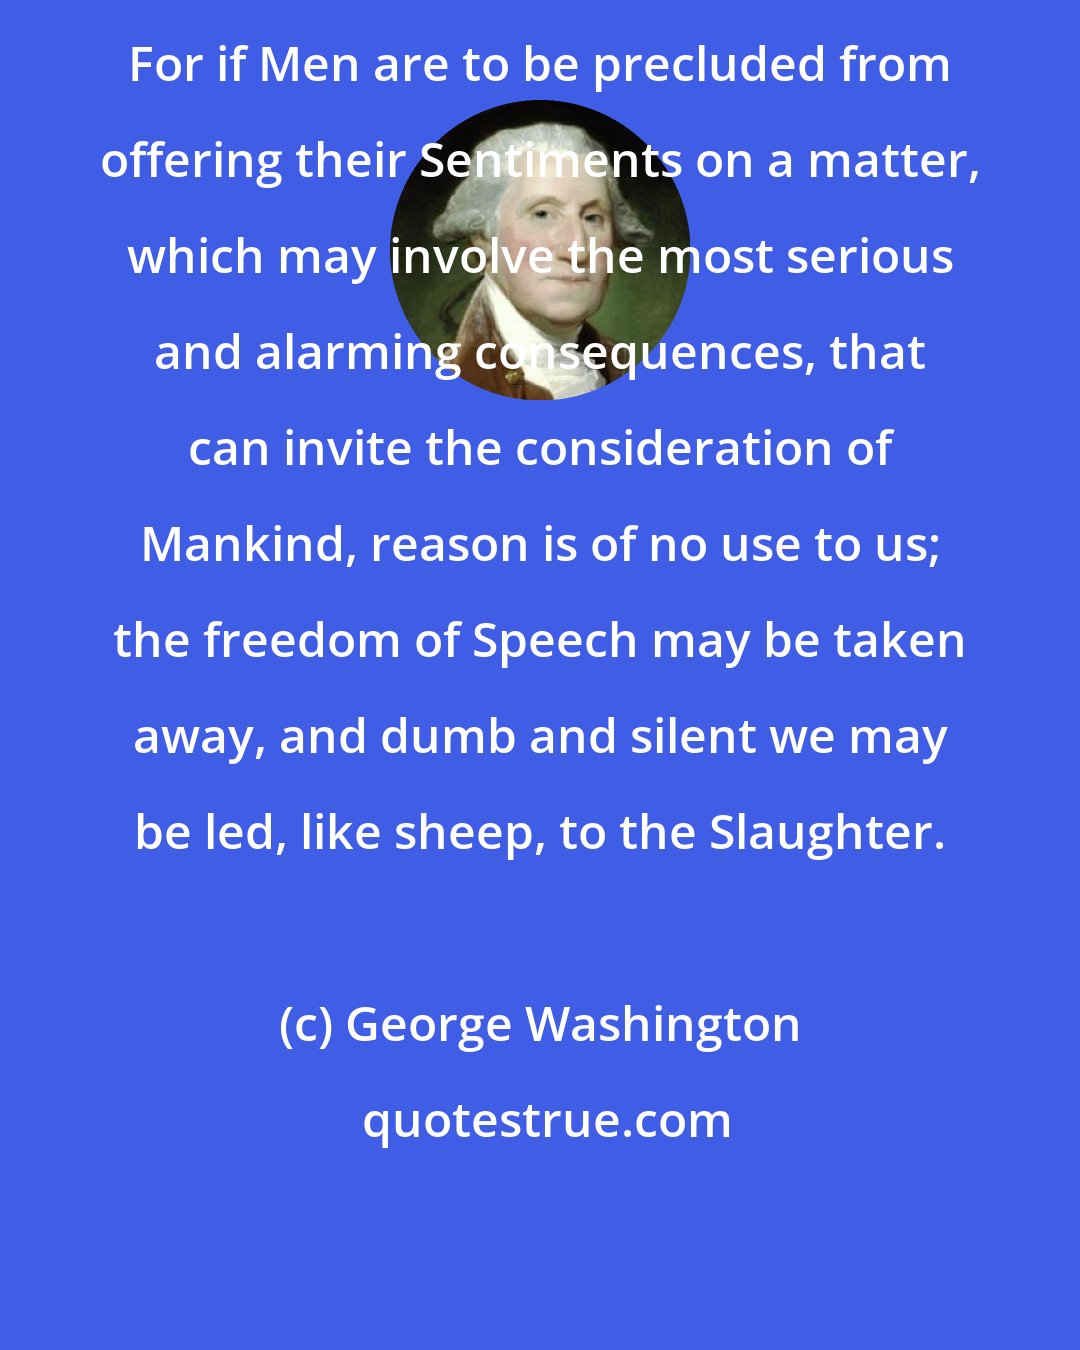 George Washington: For if Men are to be precluded from offering their Sentiments on a matter, which may involve the most serious and alarming consequences, that can invite the consideration of Mankind, reason is of no use to us; the freedom of Speech may be taken away, and dumb and silent we may be led, like sheep, to the Slaughter.